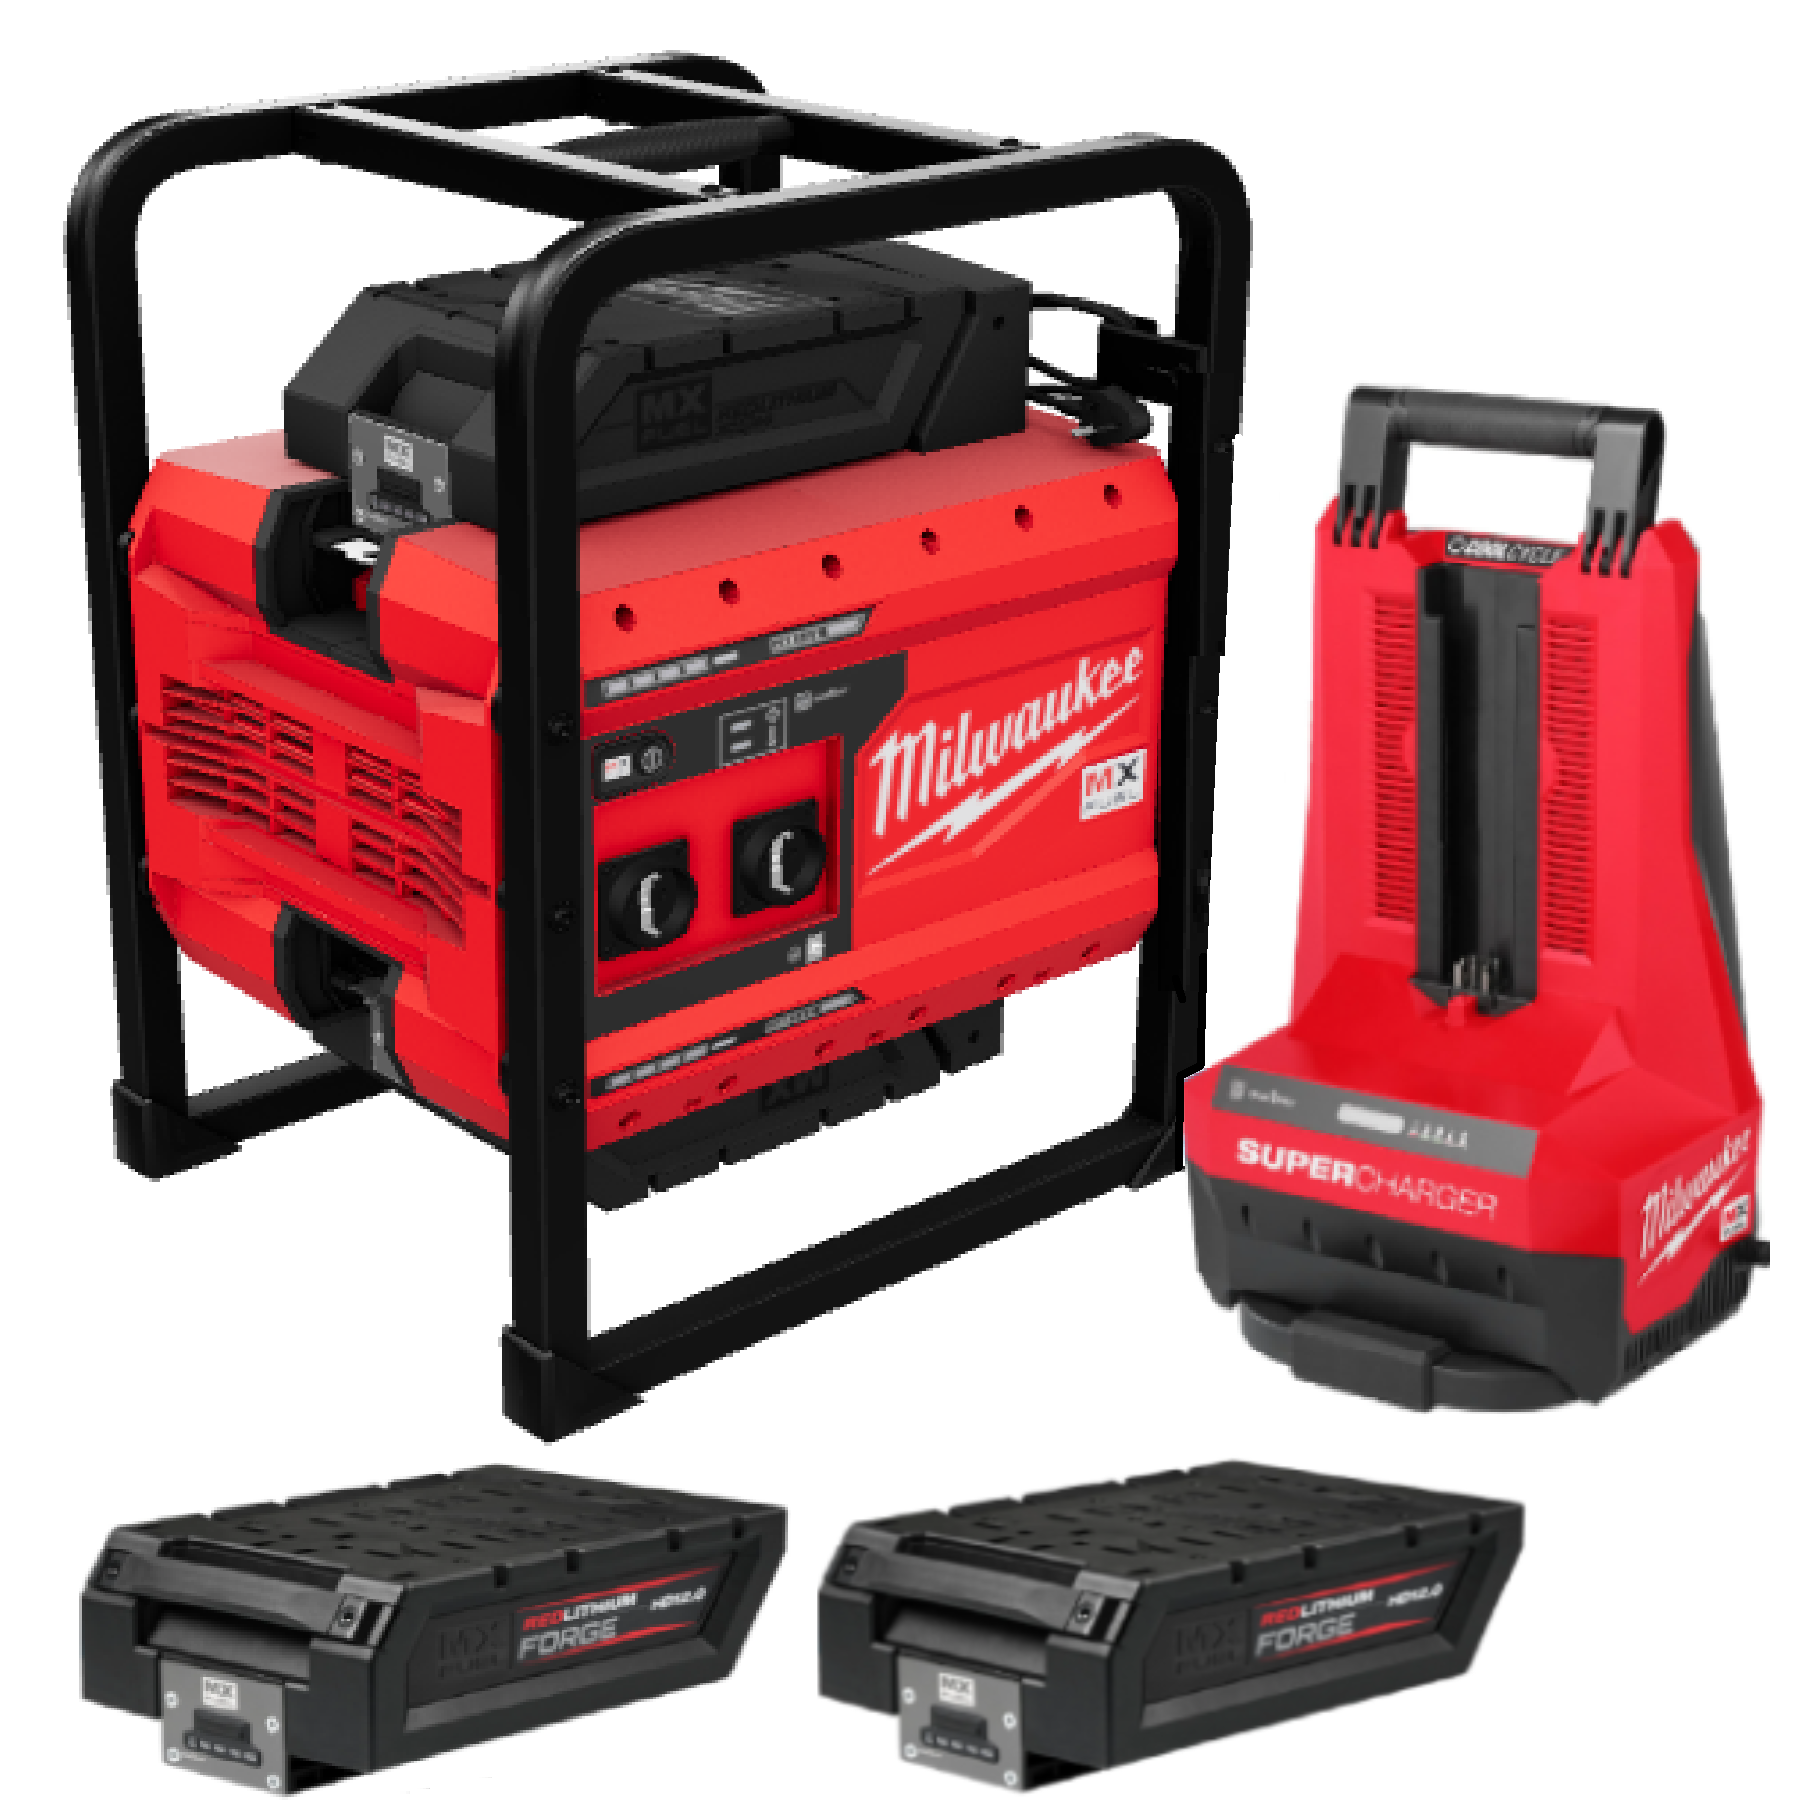 MILWAUKEE MX FUEL 3600W/1800W Portable Power Supply With HD812 Battery Kit 2 X 12.0AH MX-FUEL HD812 With FUEL SUPERCHARGER MXF-5C